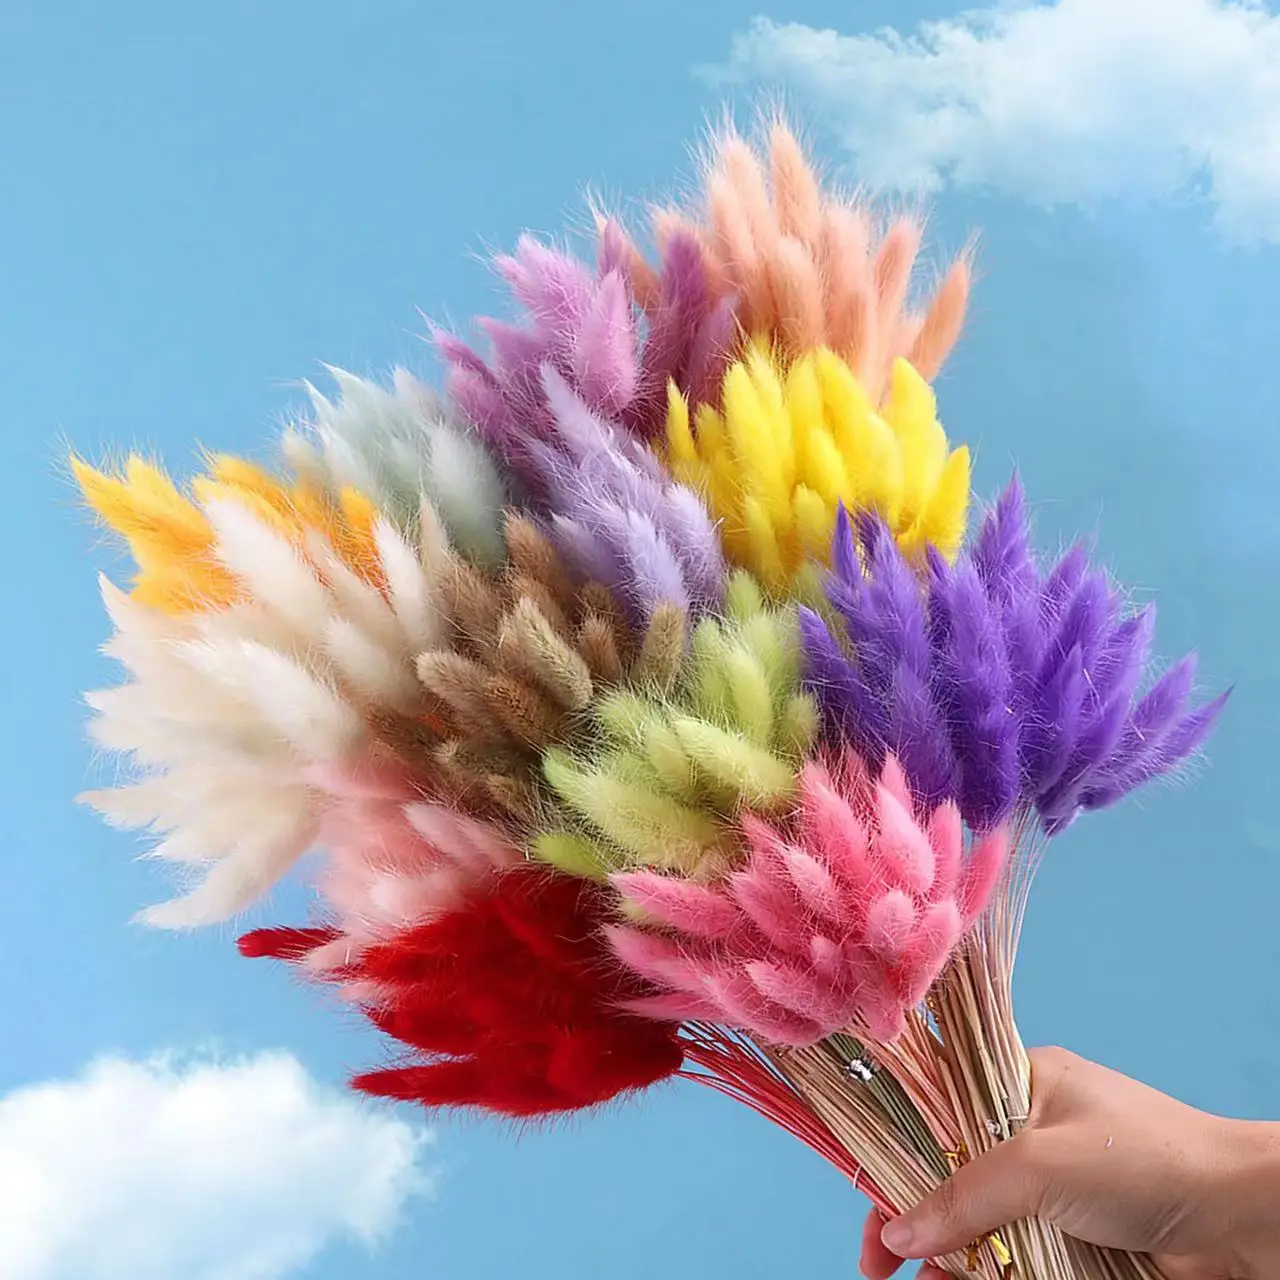 

60pcs Real Natural Floral Dried Flowers Bunny Rabbit Tail Grass Mixed Bouquet Colorful Lagurus Ovatus for Photo Props Decoration